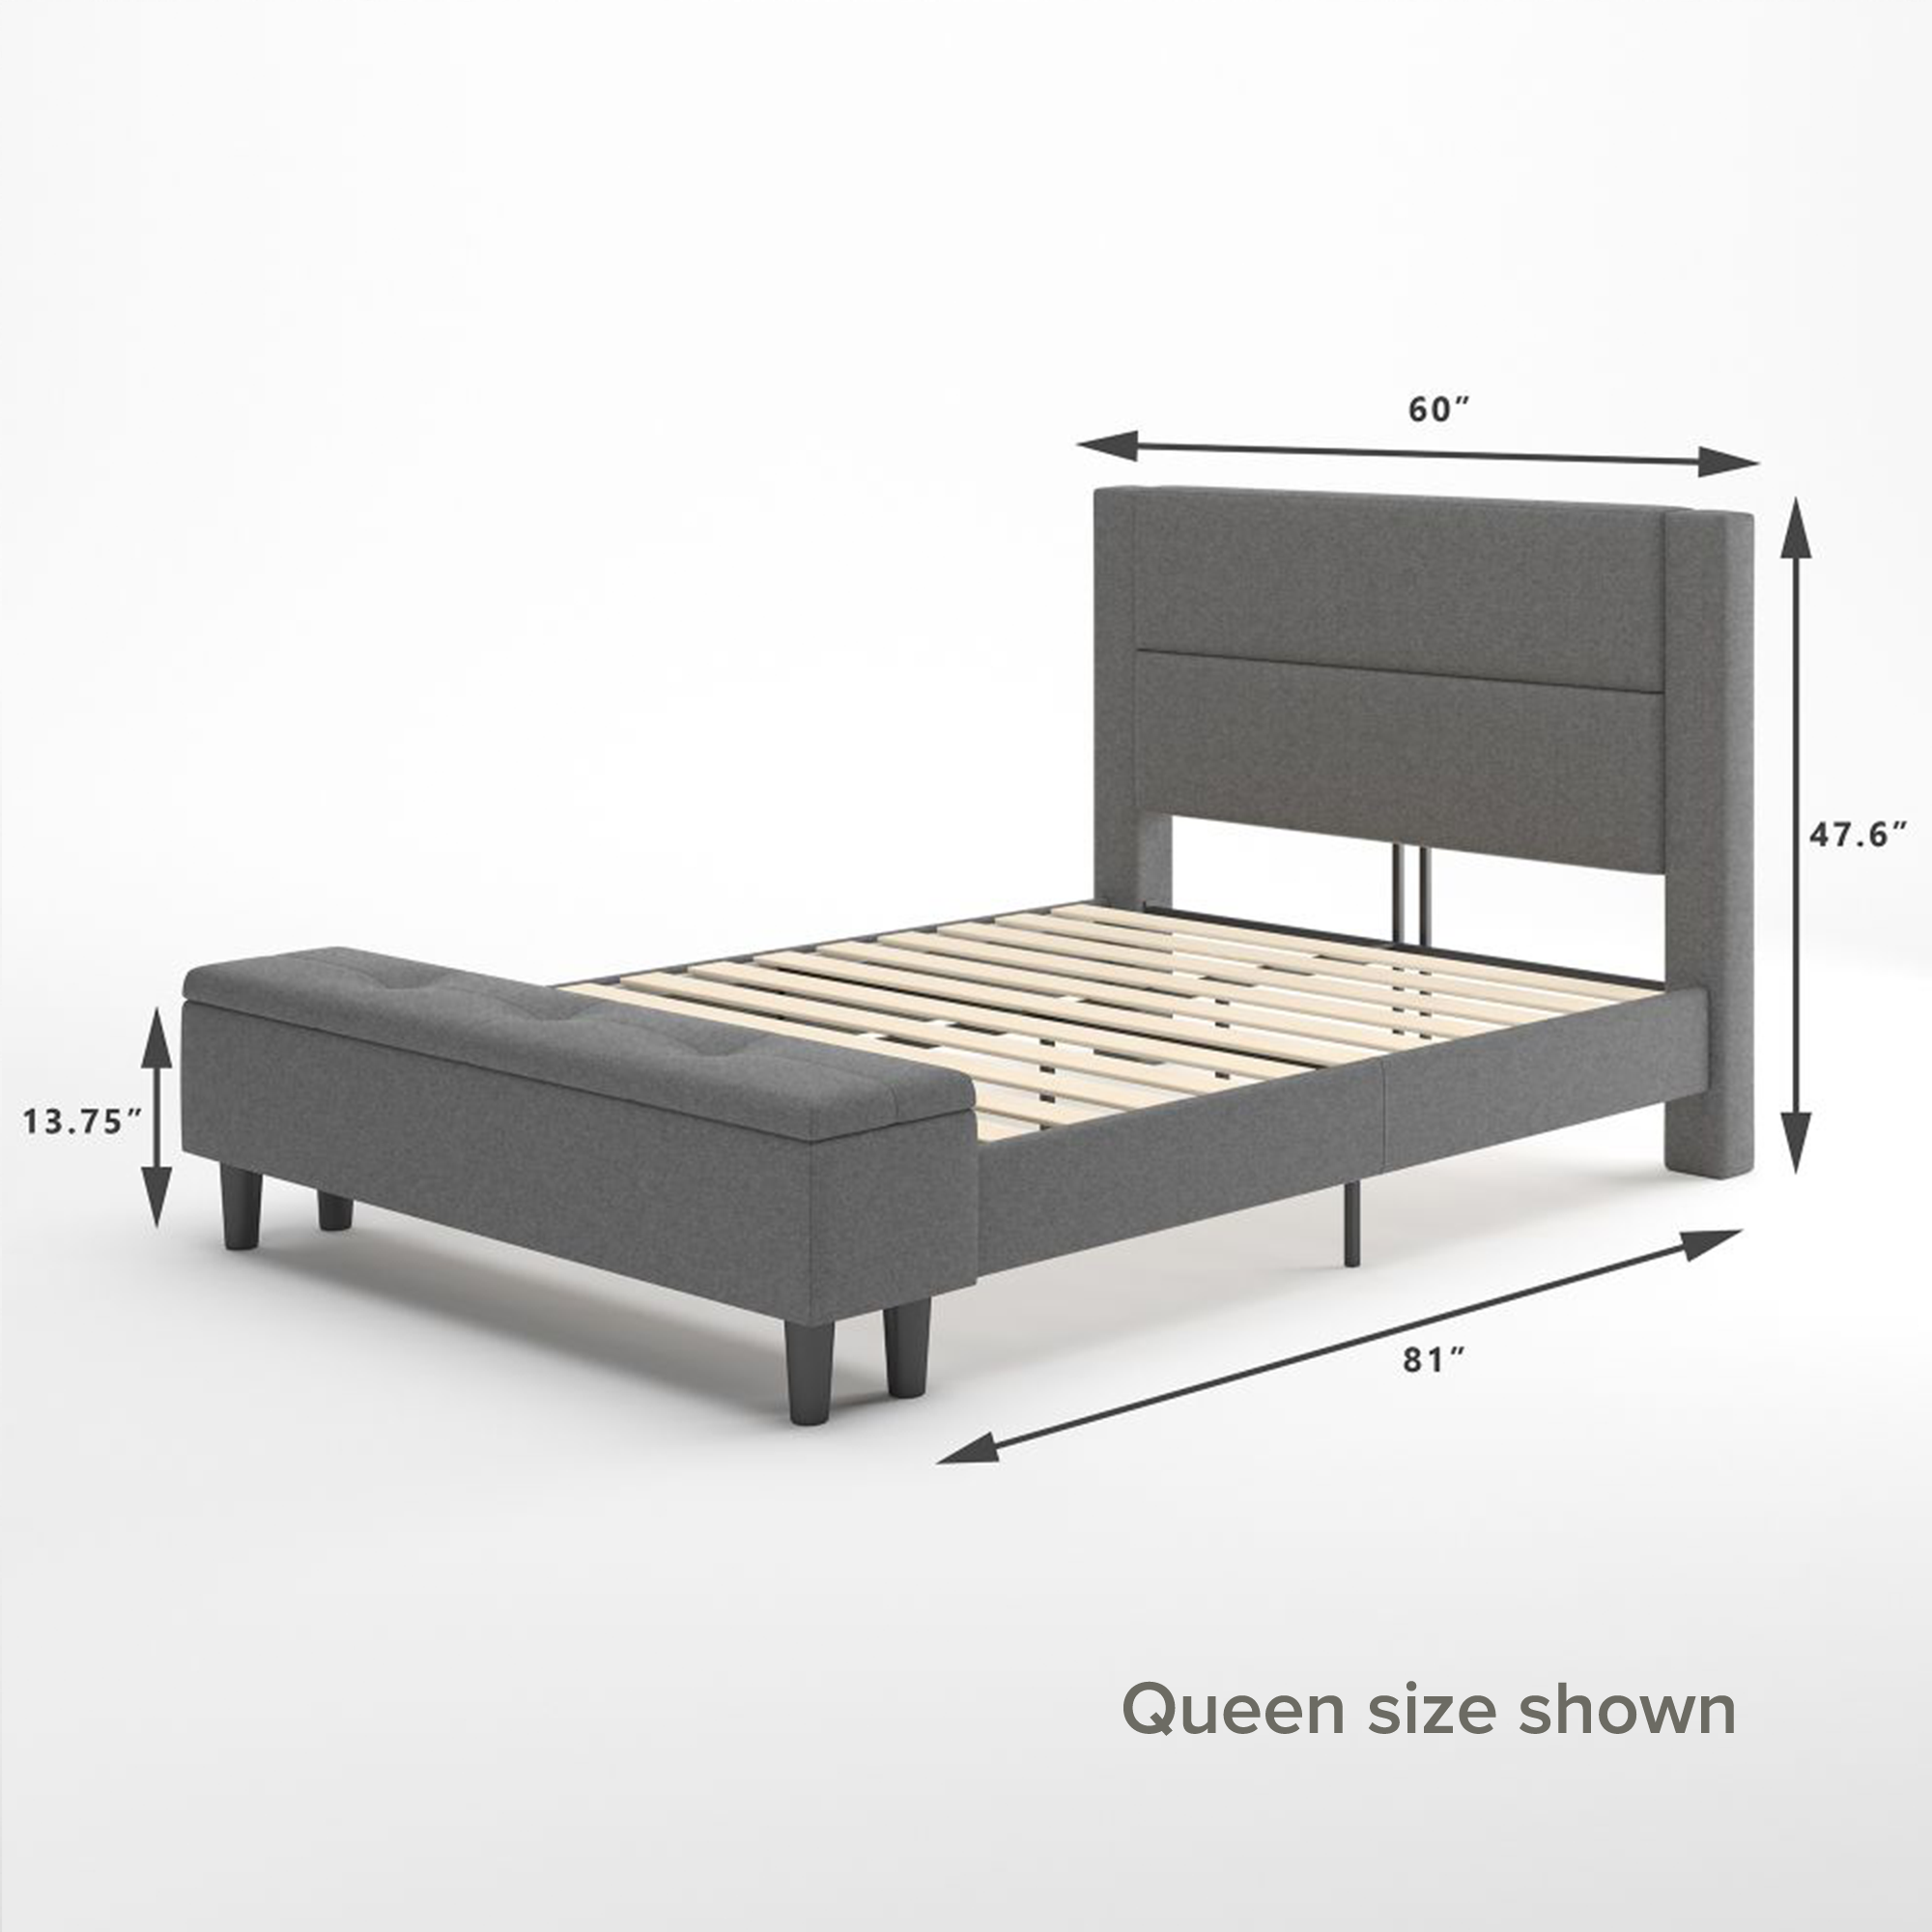 Wanda upholstered Platform Bed with storage queen size dimensions shown